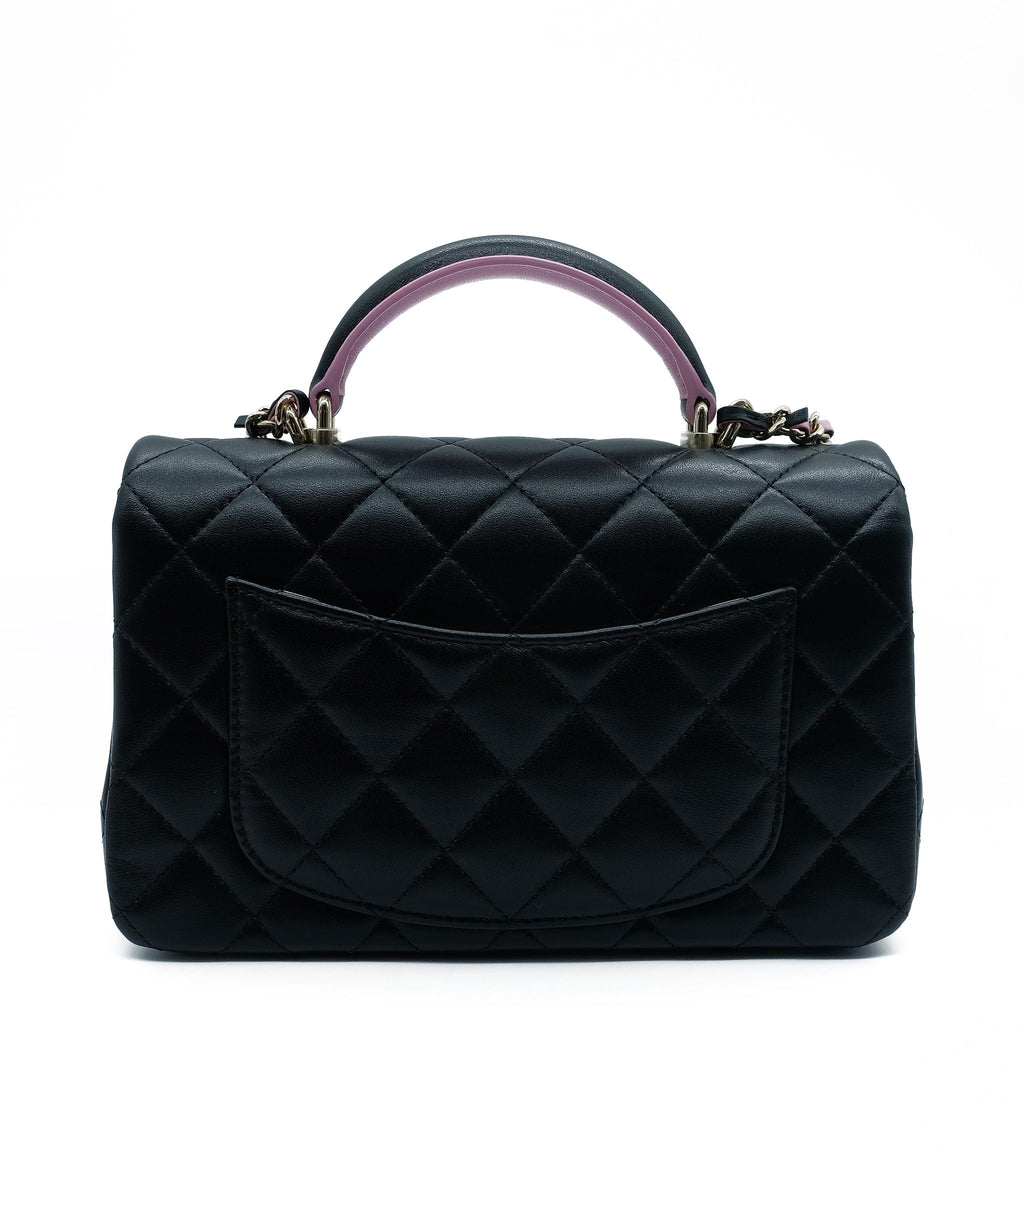 Chanel Black Two Tone Limited Edition Mini Top Handle Flap Bag